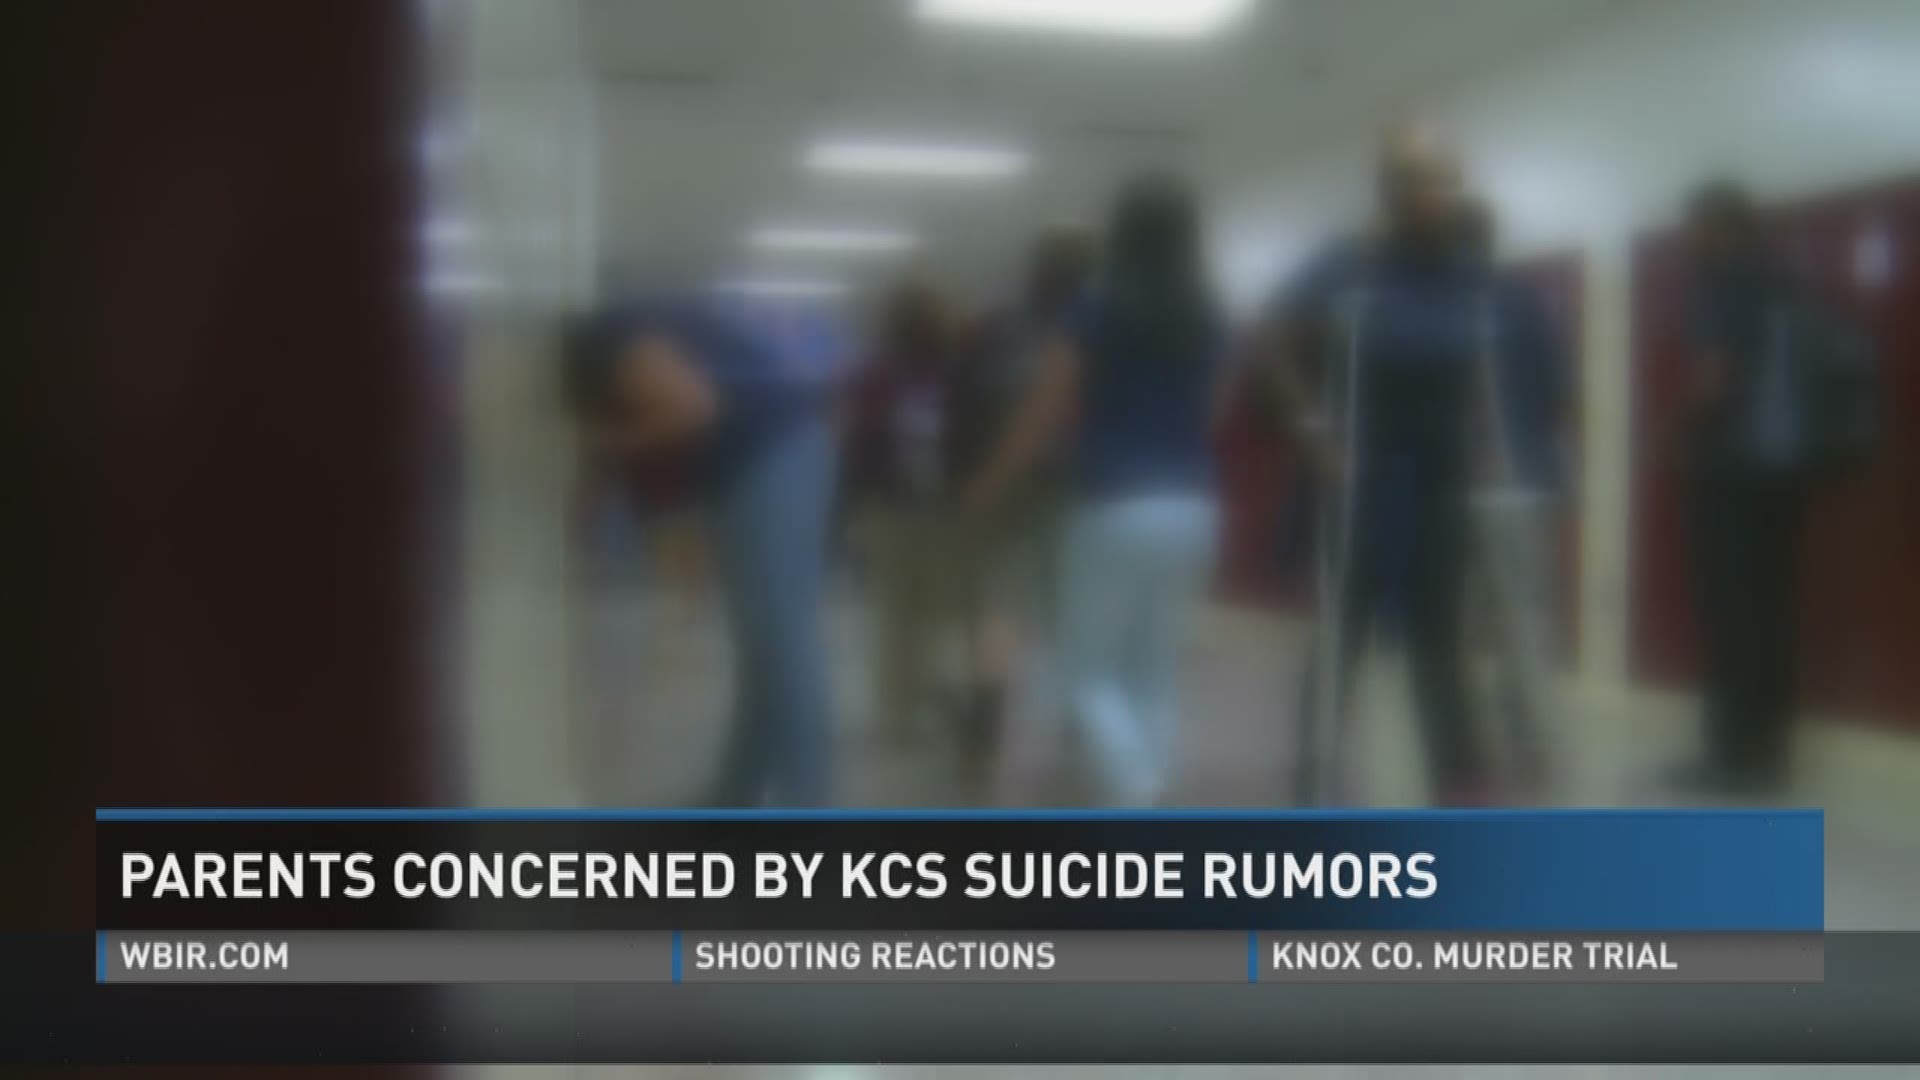 Knox County school parents are concerned with recent rumors about suicide.